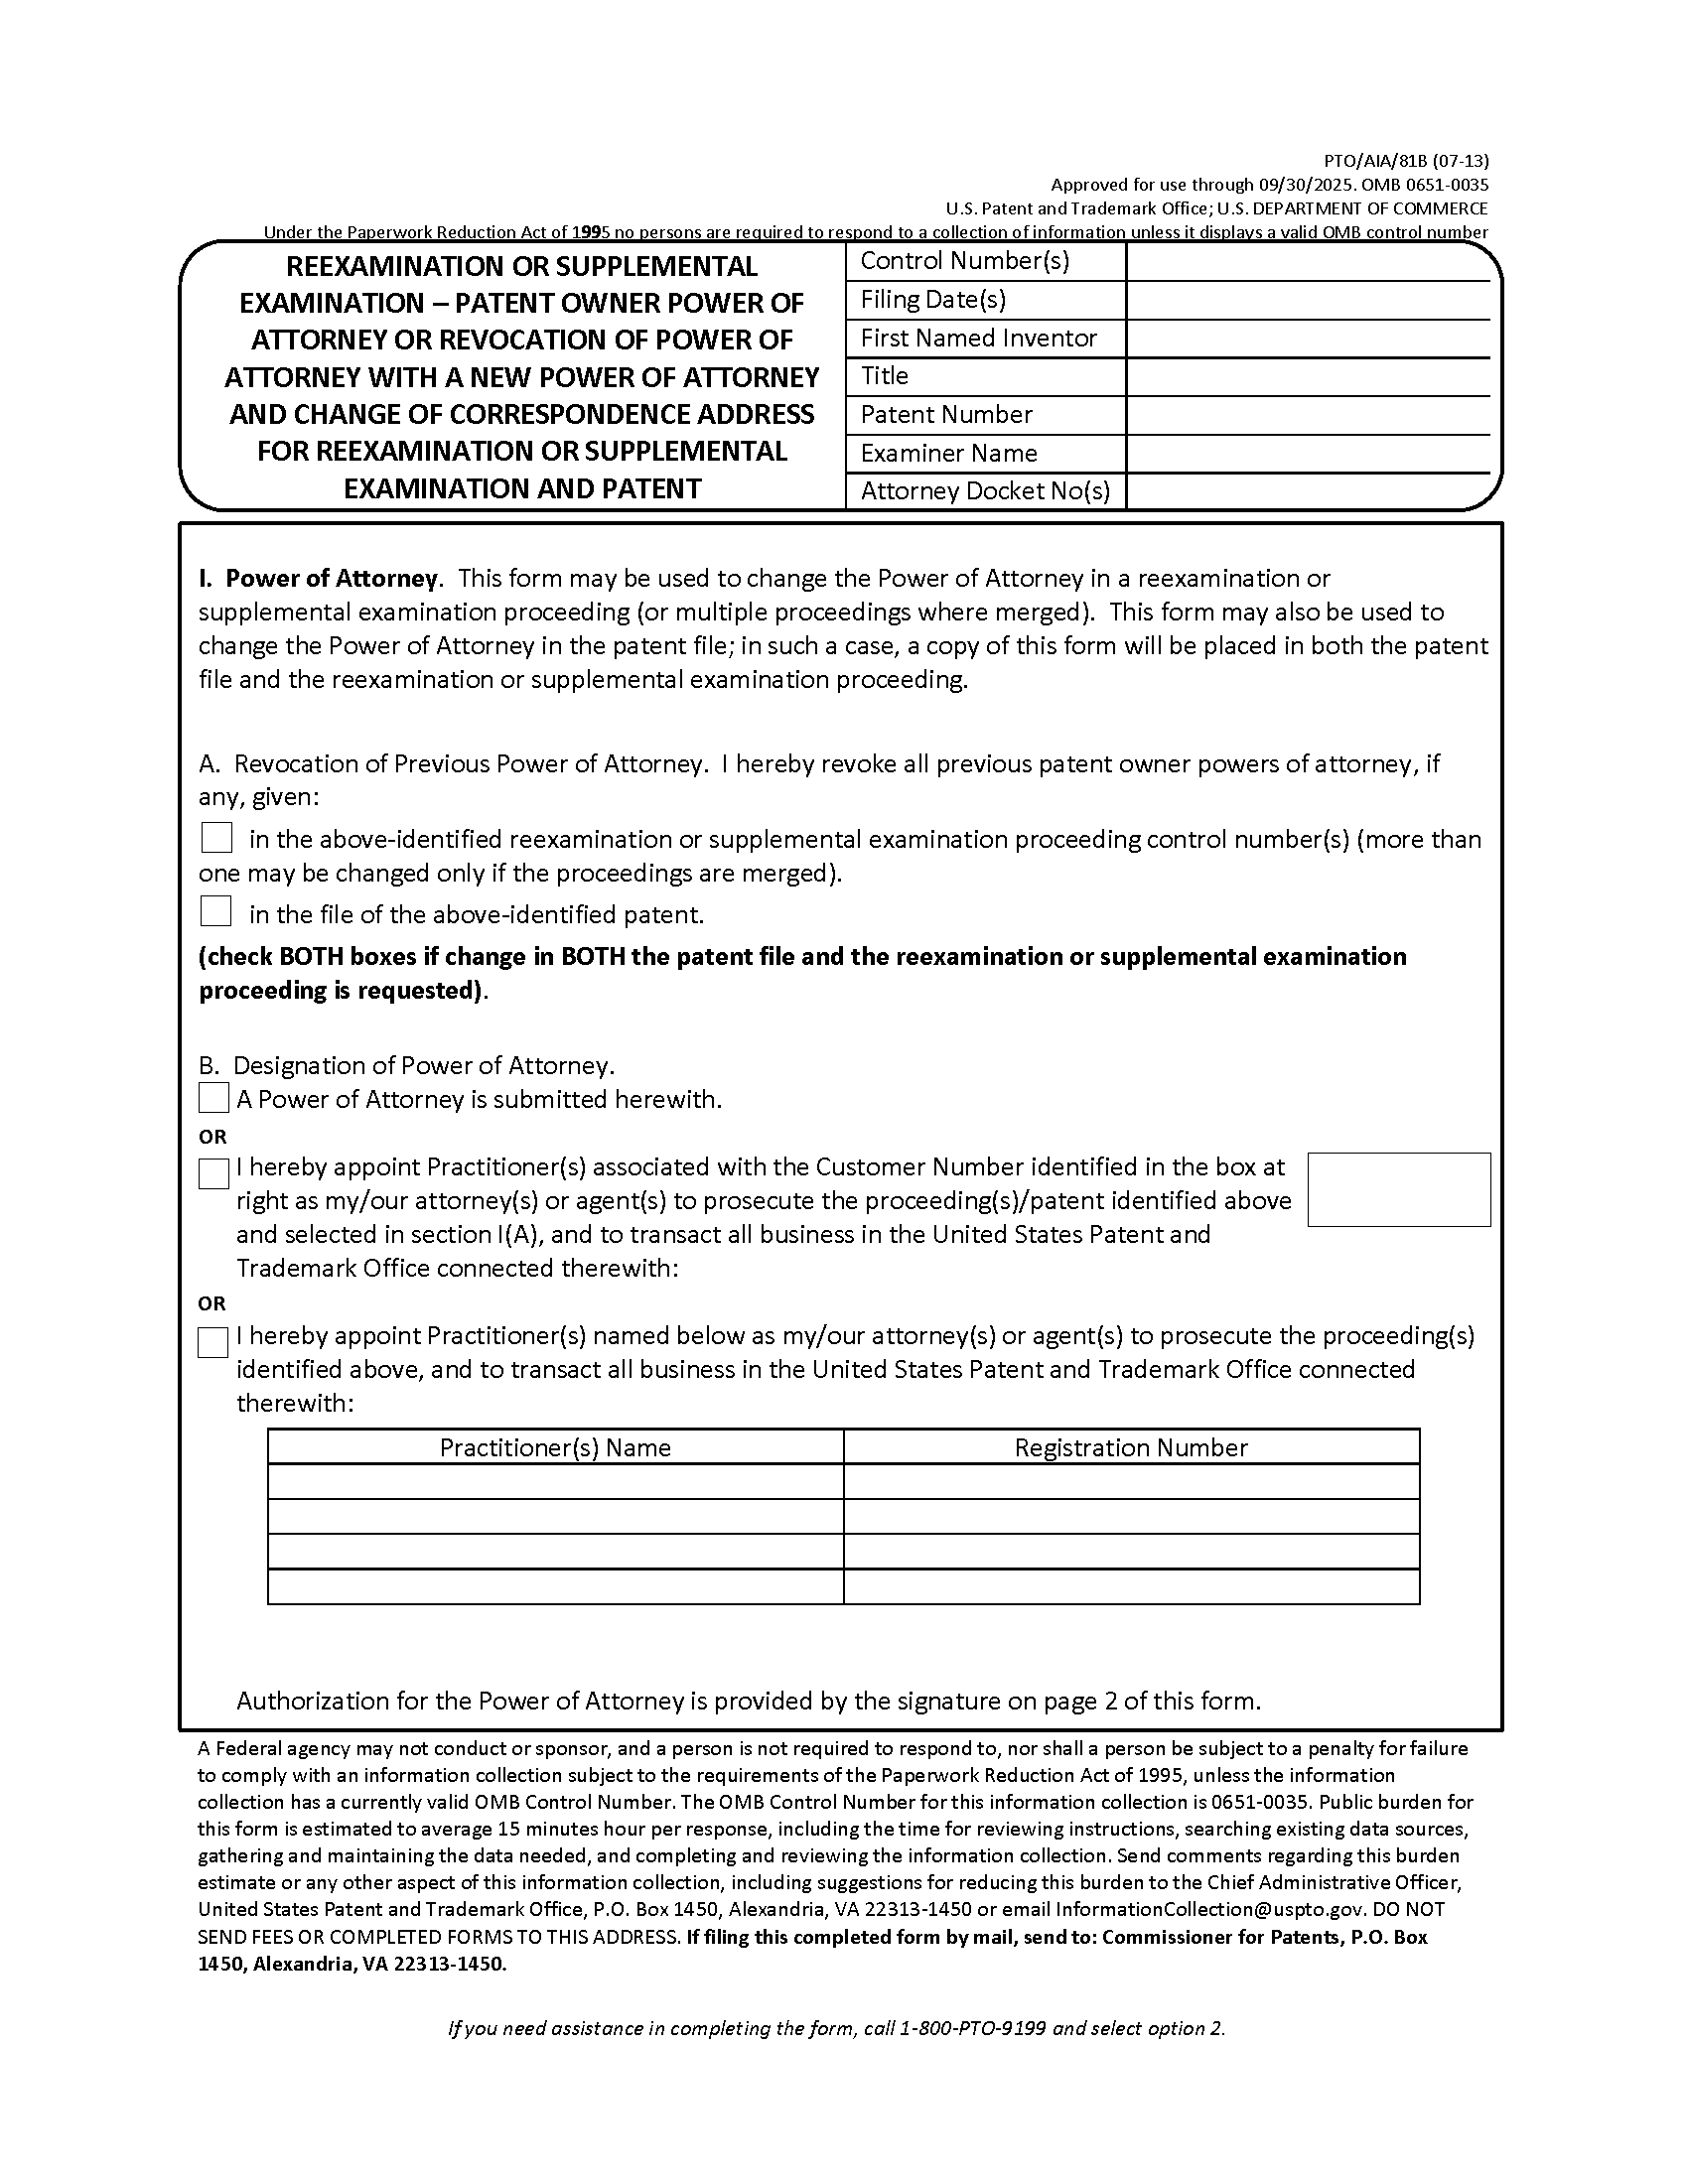 Page 1 of Form PTO/AIA/81B Reexamination or Supplemental Examination - Patent Owner Power of Attorney or Revocation of Power of Attorney With New Power of Attorney and Change of Correspondence Address